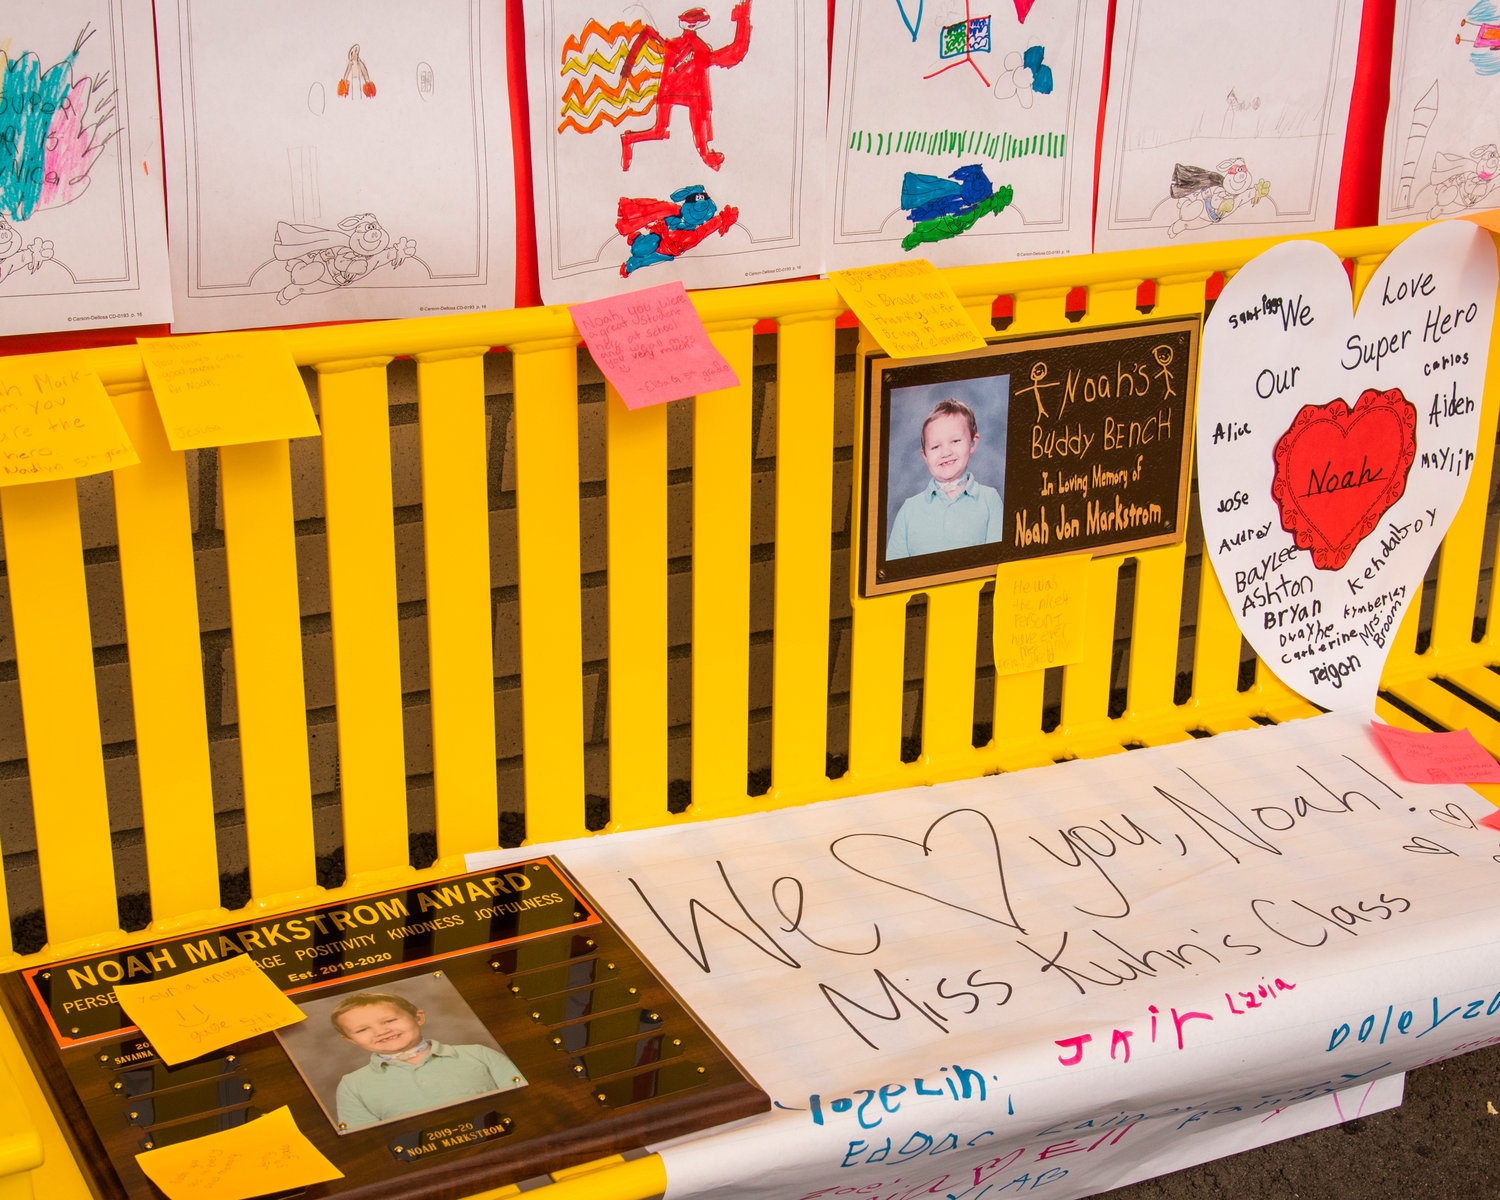 The bench is dedicated to Noah Markstrom, a Tiny Tiger who died at age 6 from brain cancer in November 2019. It was donated by the Noah Jon Markstrom Foundation, which was founded by Noah’s family. The foundation’s mission is to raise scholarships and student loan payment grants for students of pediatric medicine, because Noah was so fond of the staff at Mary Bridge Children’s Hospital.